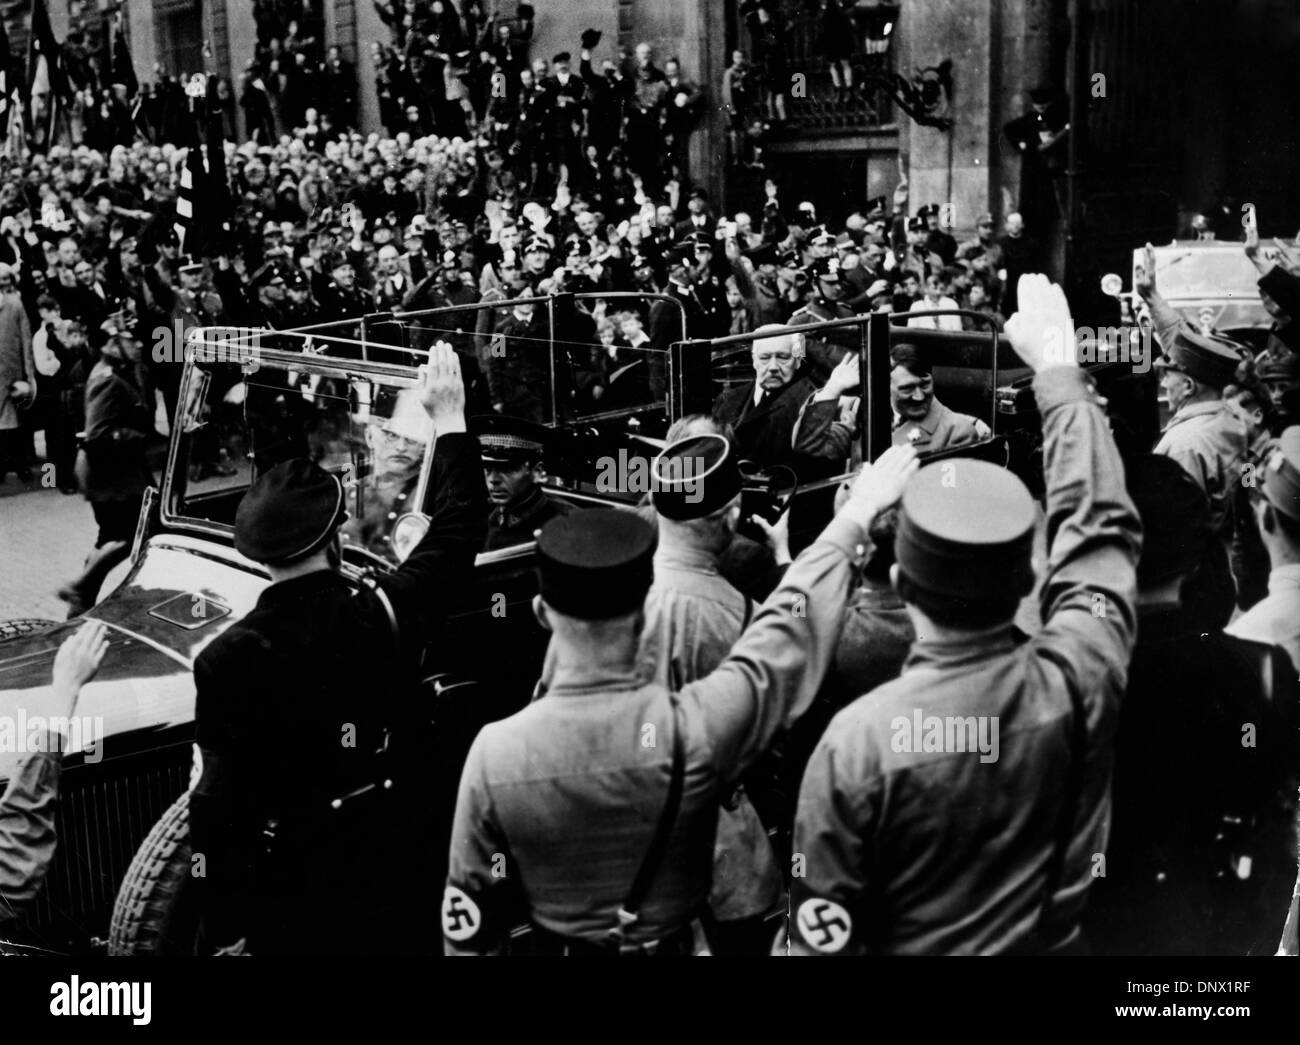 May 1, 1933 - Berlin, Germany - German Reich President PAUL VON HINDENBURG  and Nazi leader ADOLF HITLER are saluted by a crowd during the celebrations  of the May Day in Germany. (